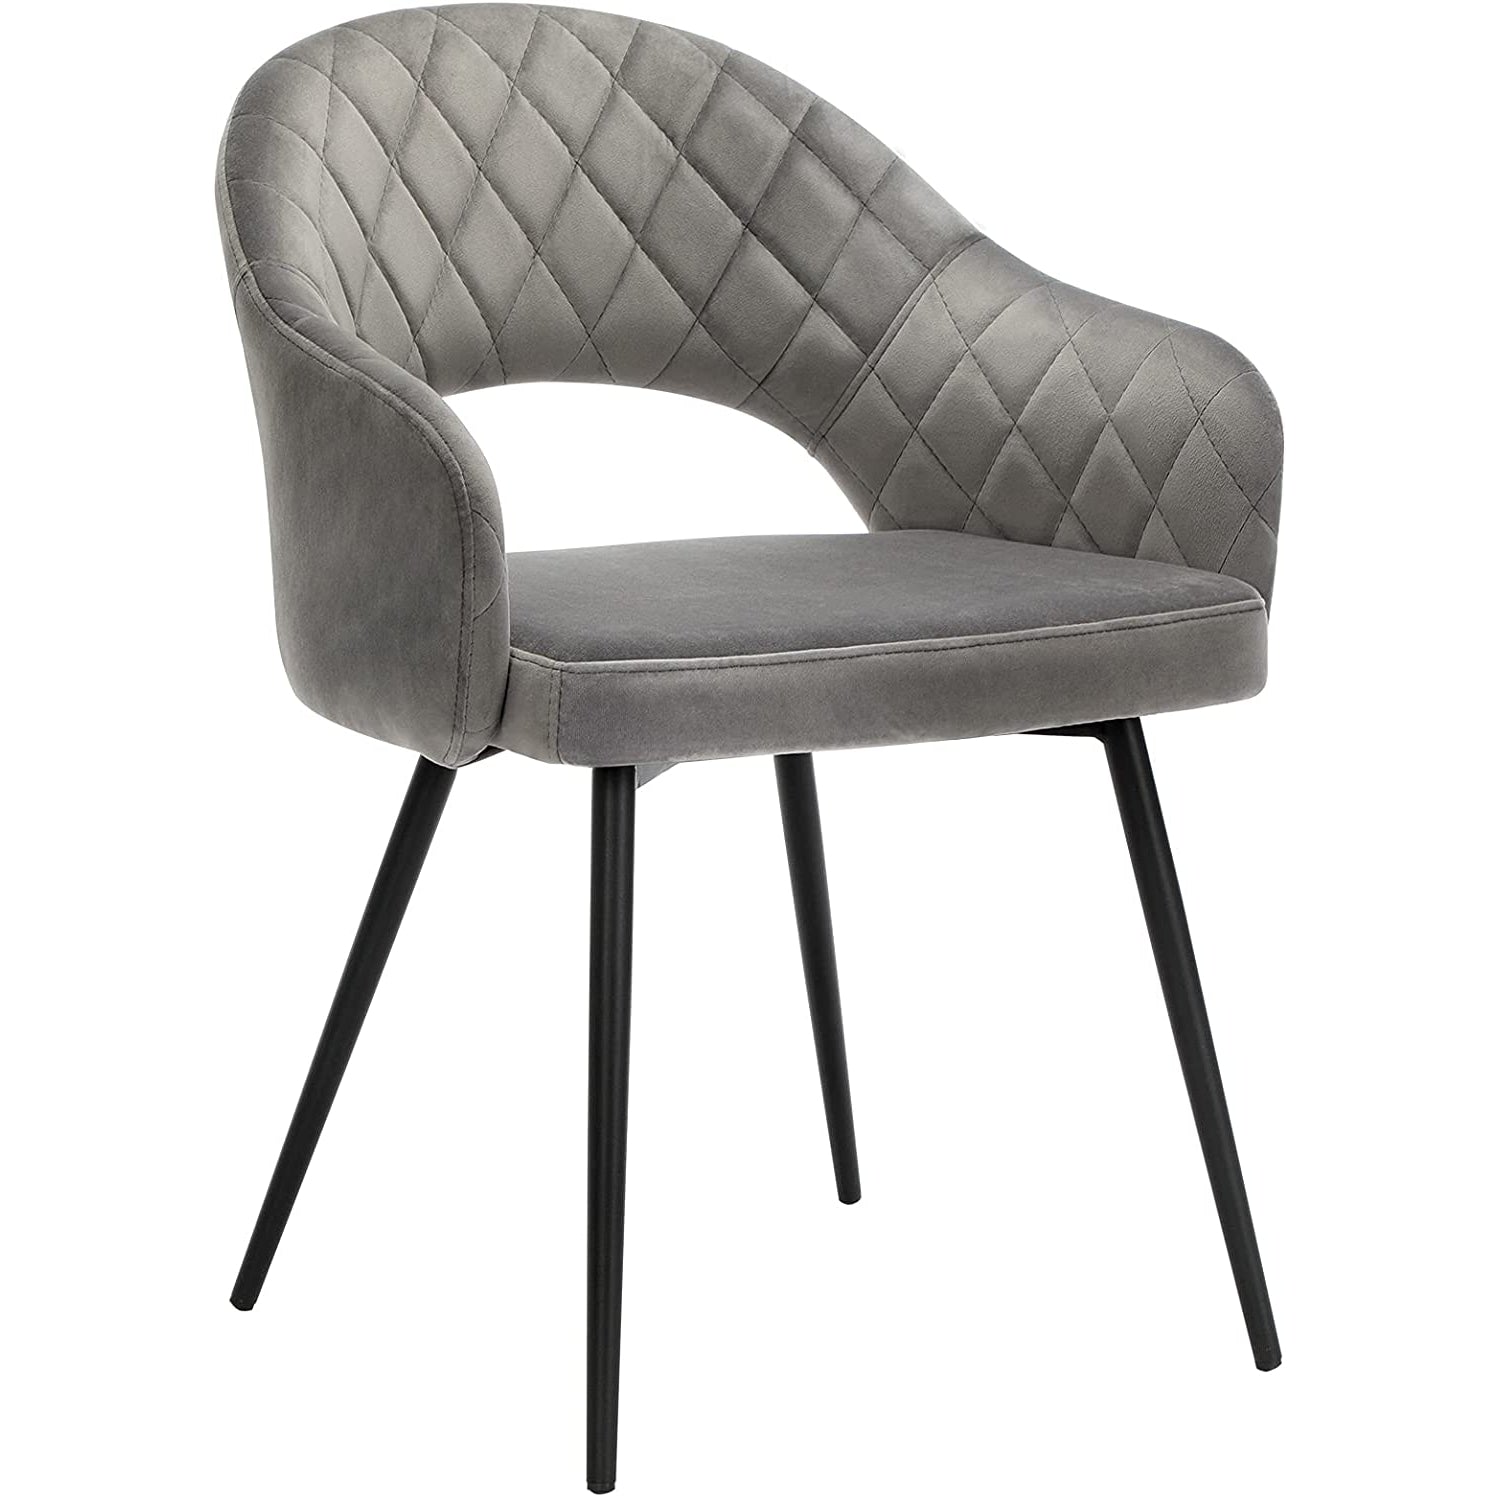 Nancy's Garson Dining room chair - Kitchen chair - Armrests - Upholstered - Metal - Gray - 57 x 56 x 77 cm